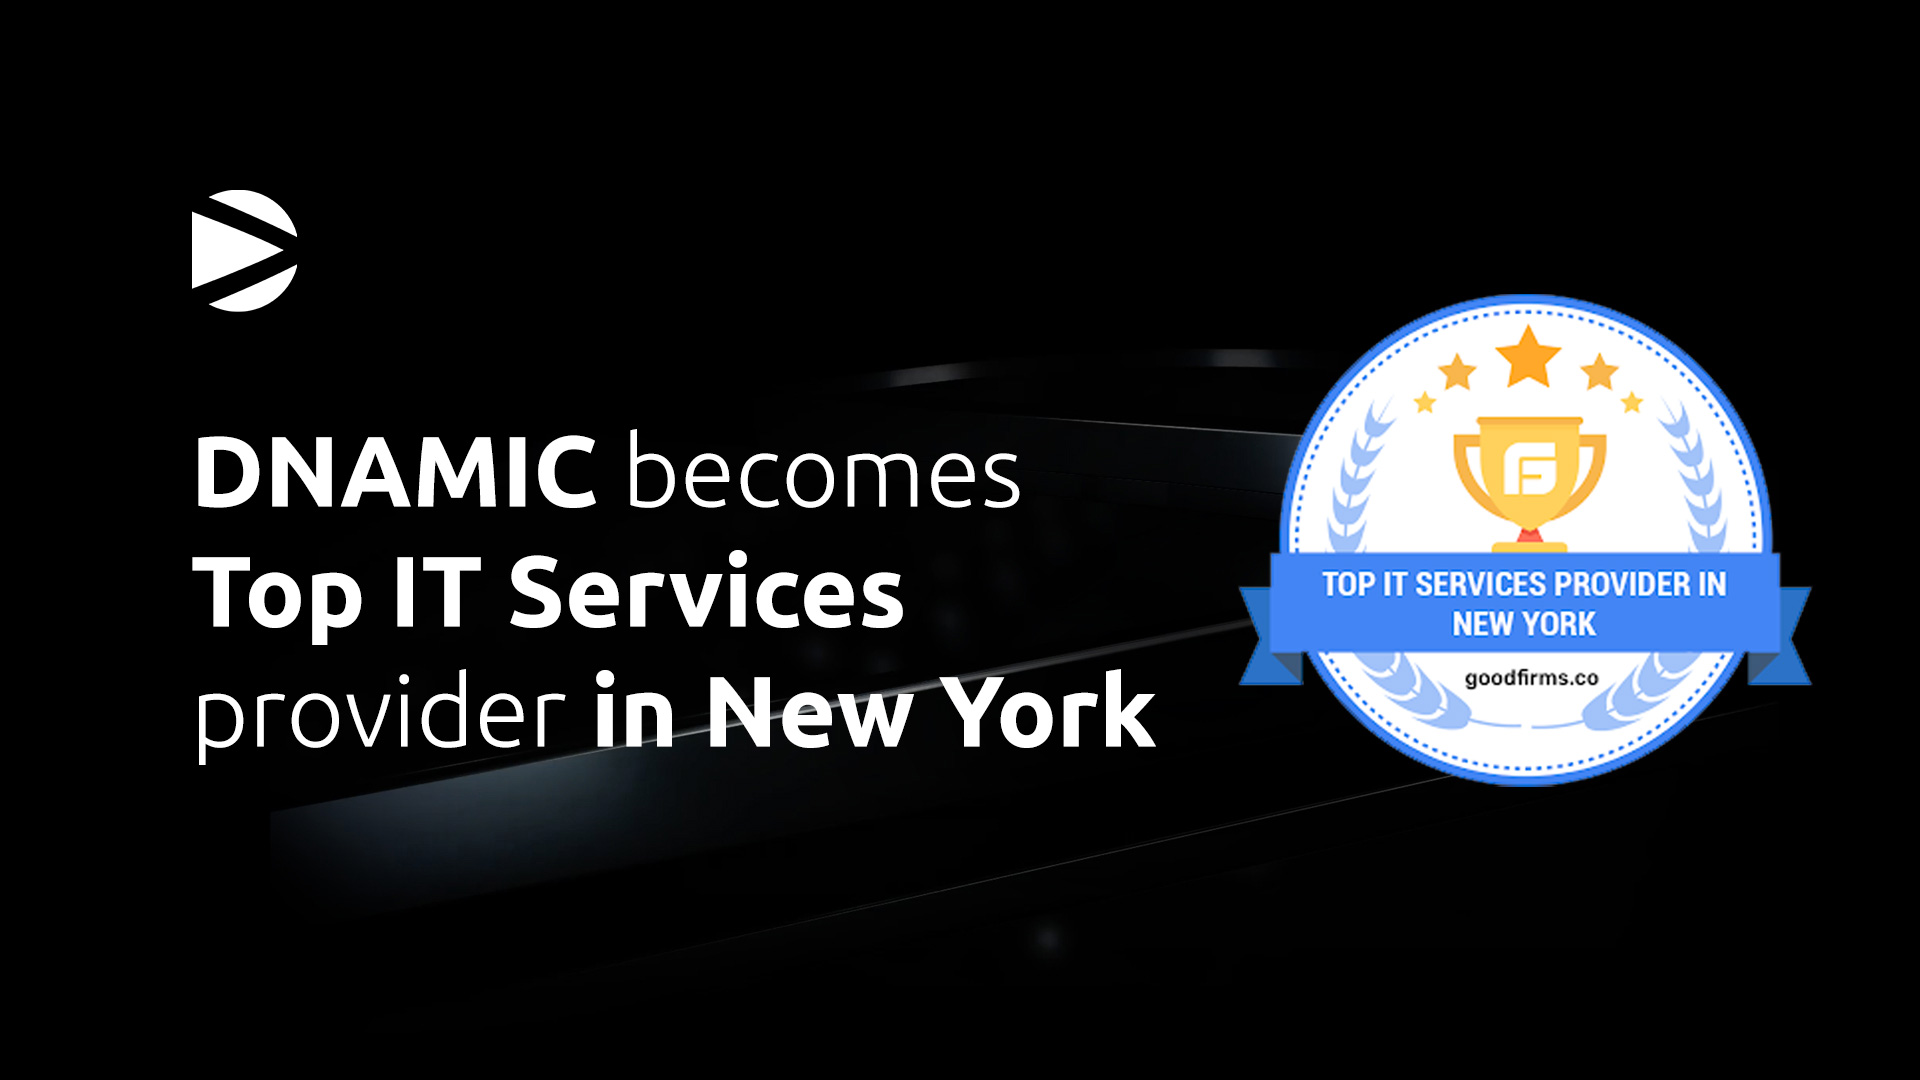 picture with the text DNAMIC becomes Top IT Services provider in New York